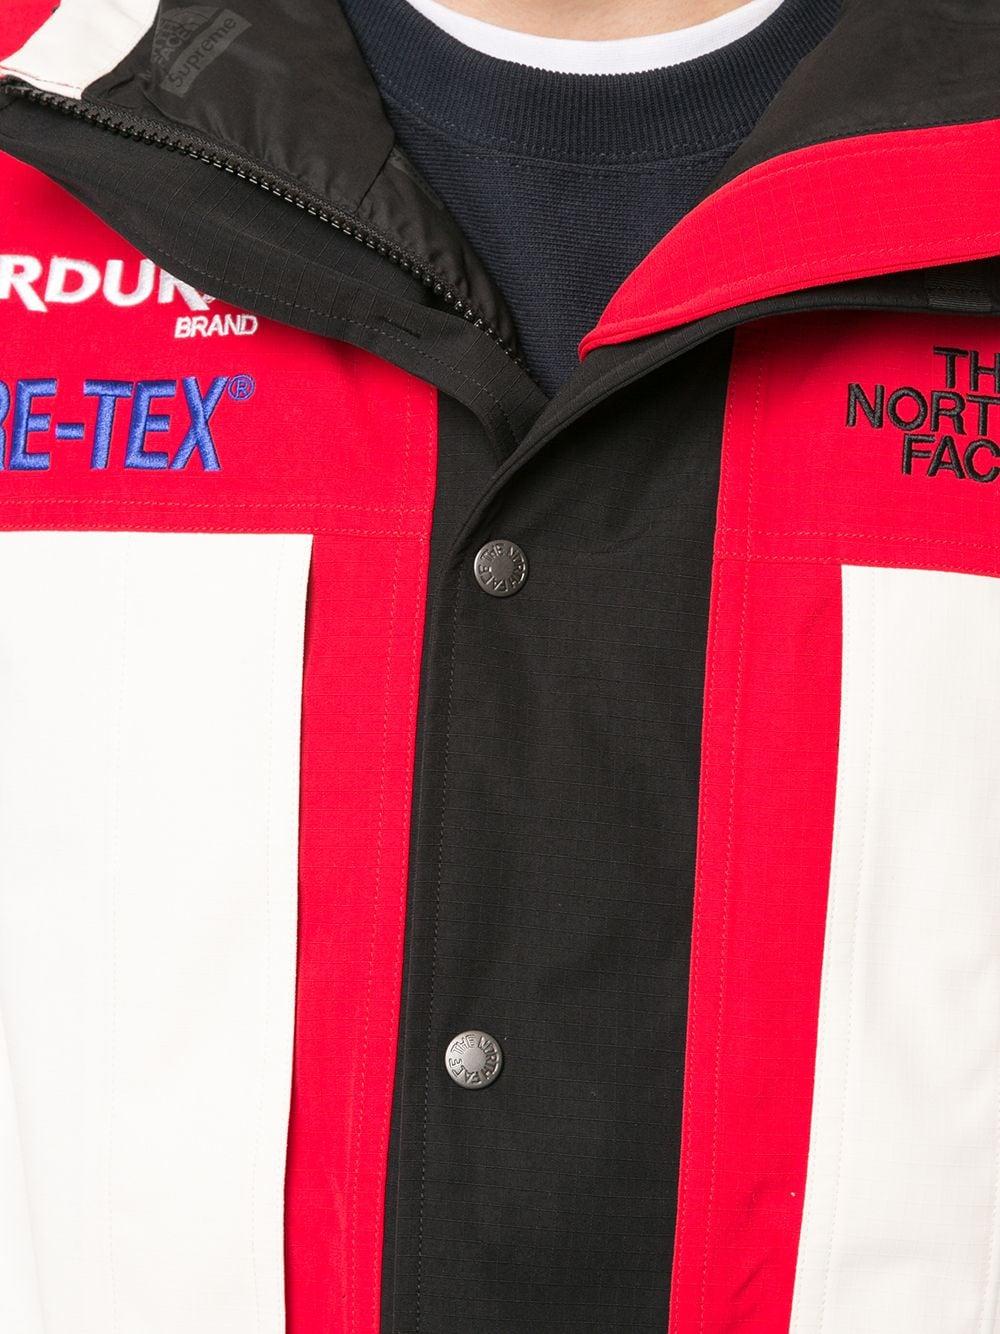 Supreme X The North Face Expedition Jacket in Red for Men - Lyst